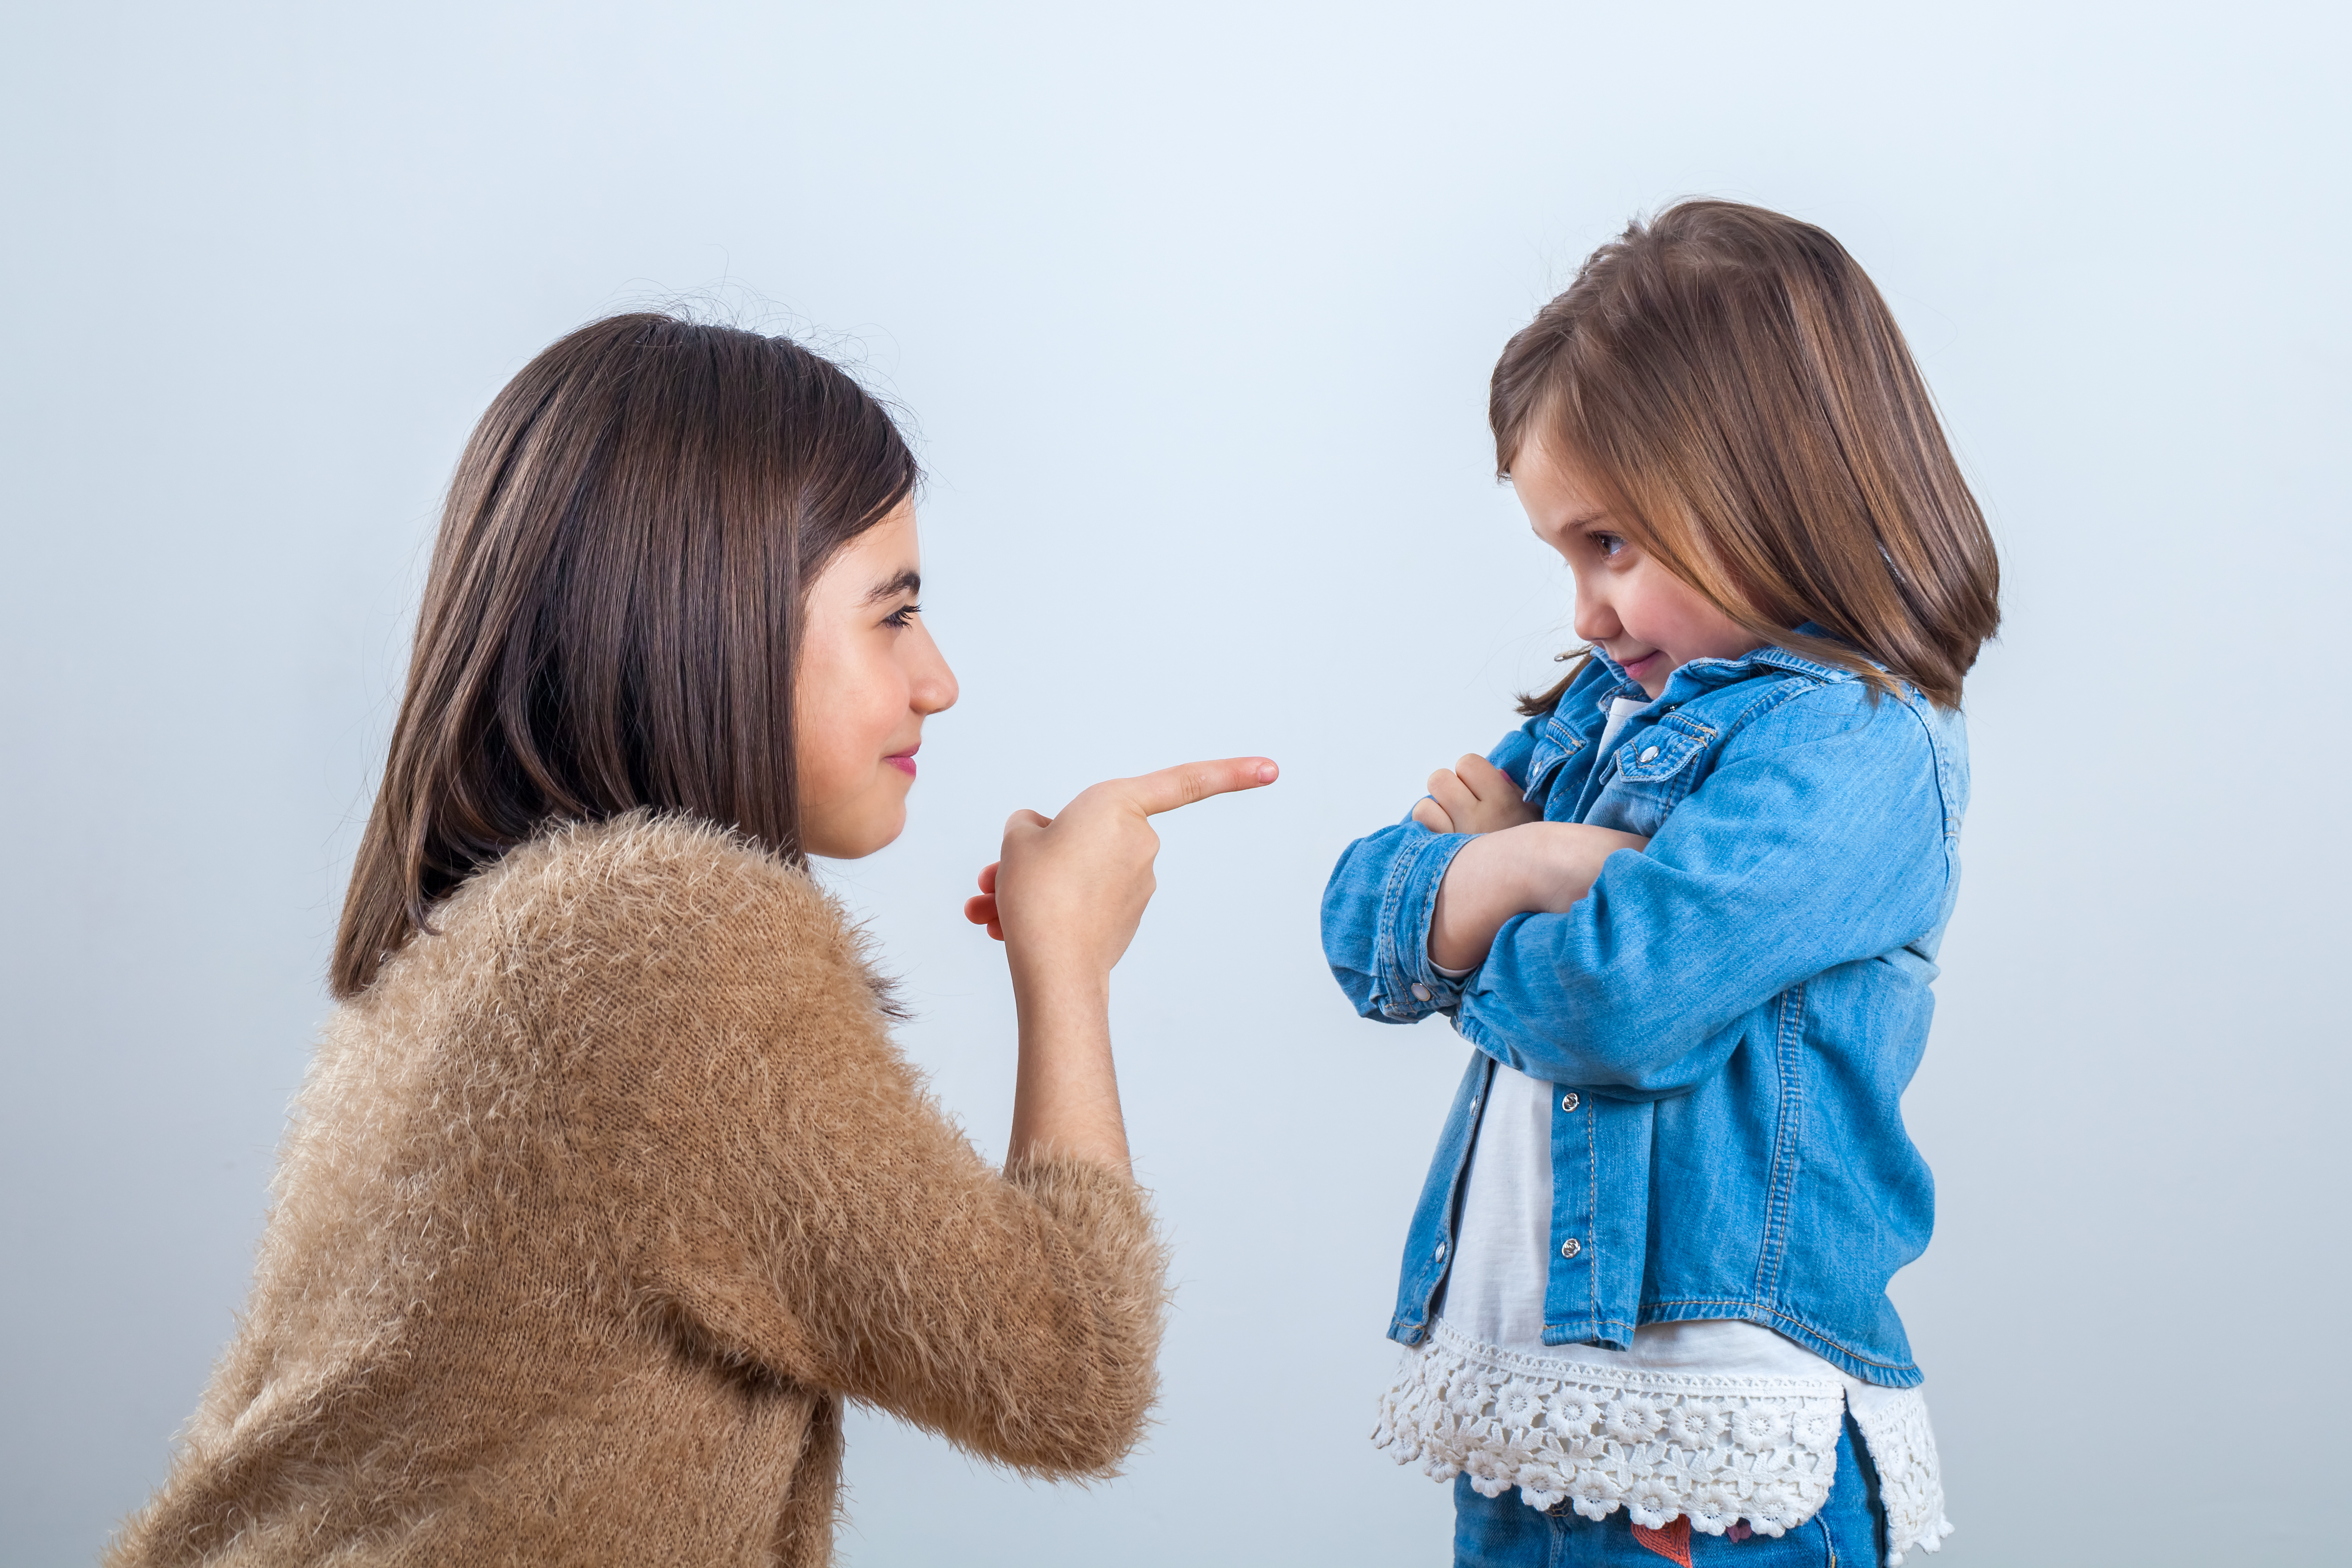 Older sister gives a remark to the younger one with a finger | Source: Getty Images